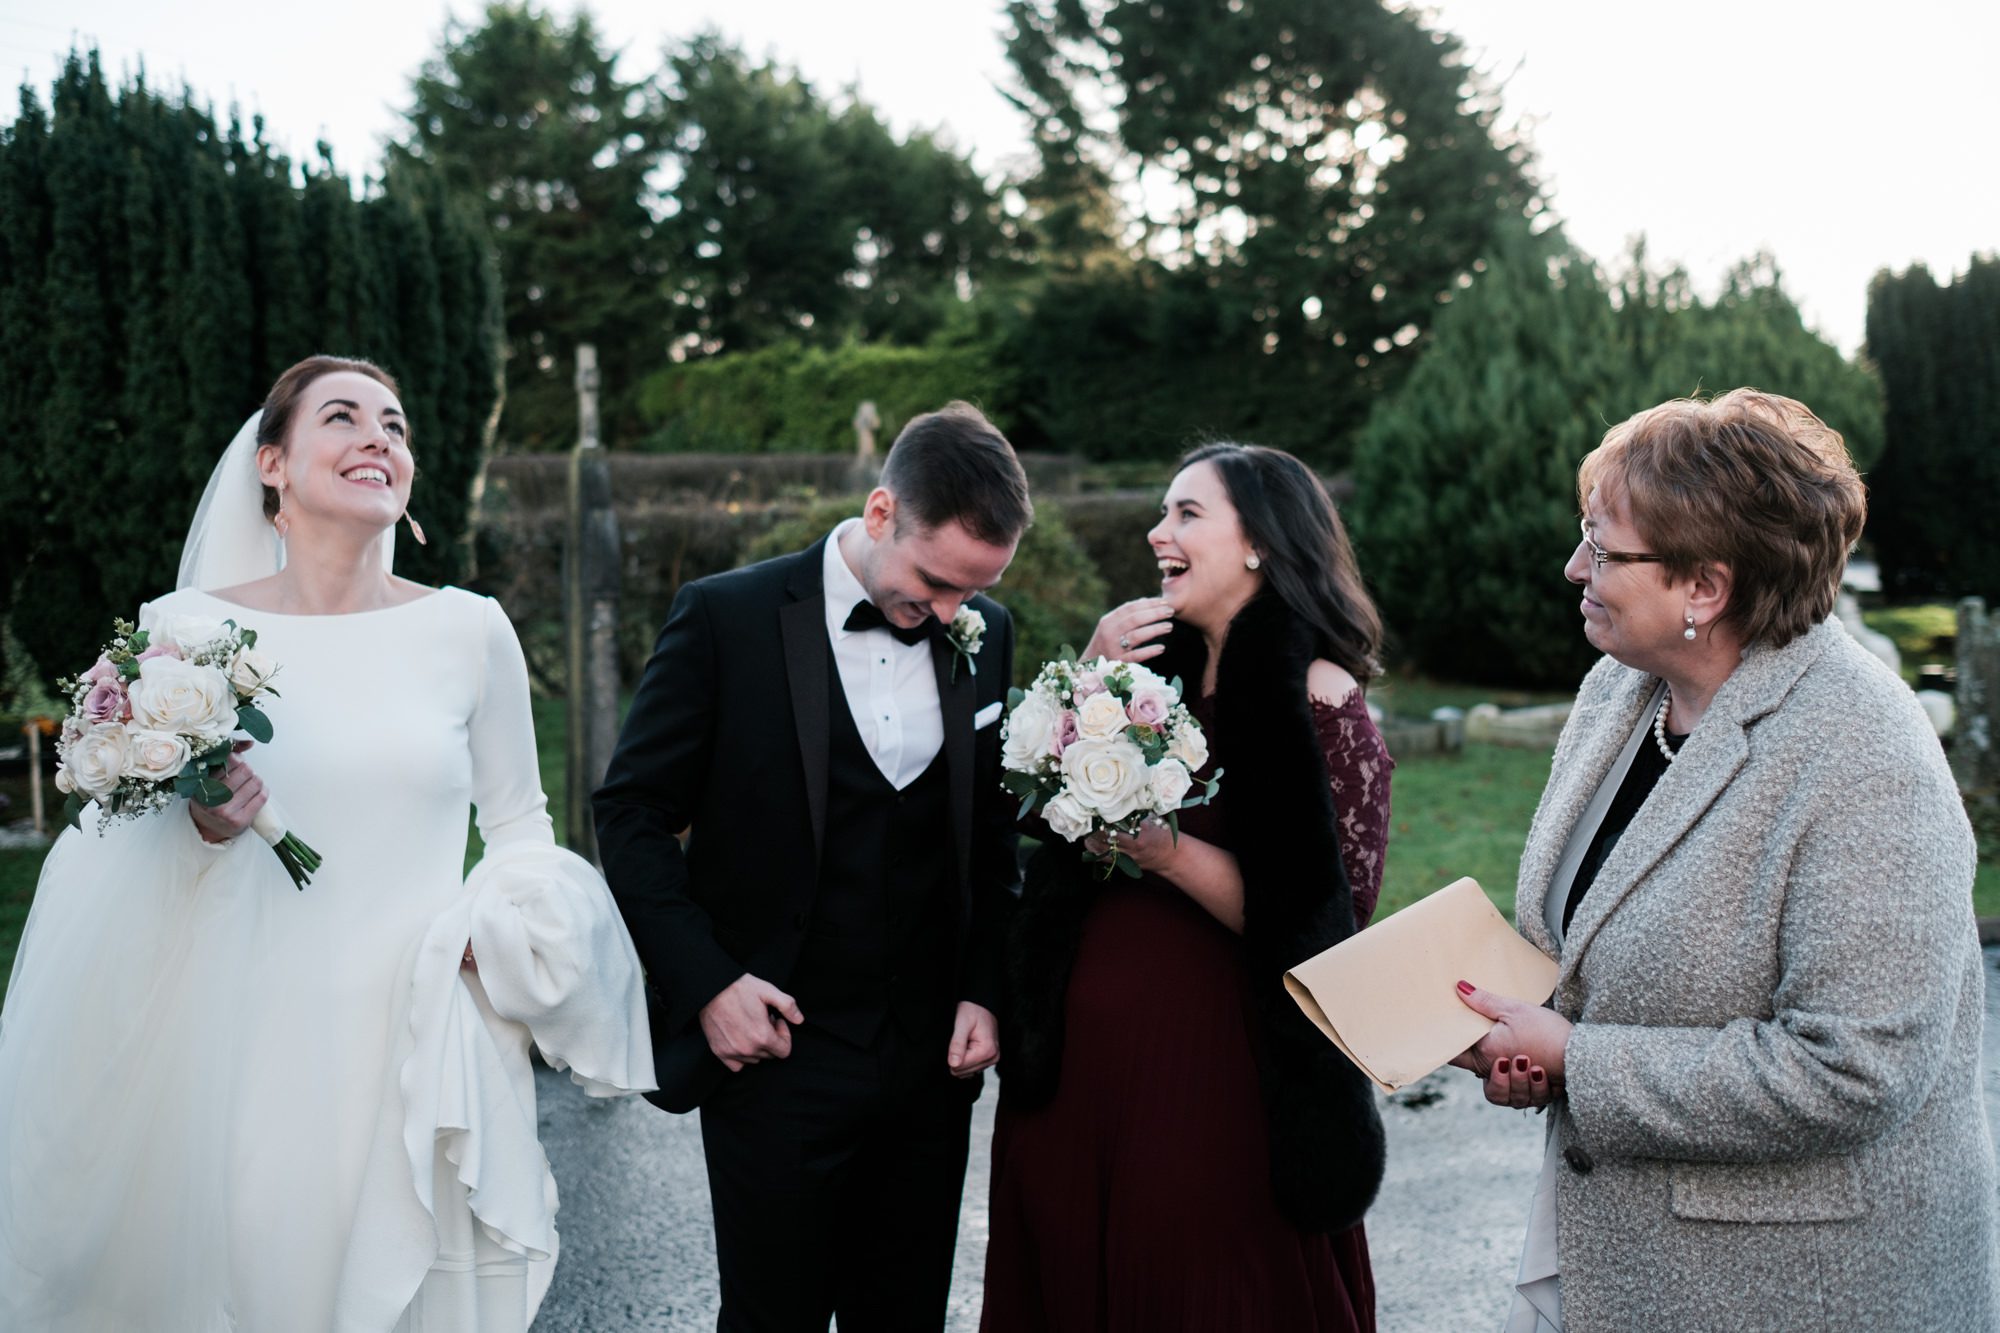 giggles outside of church after wedding ceremony